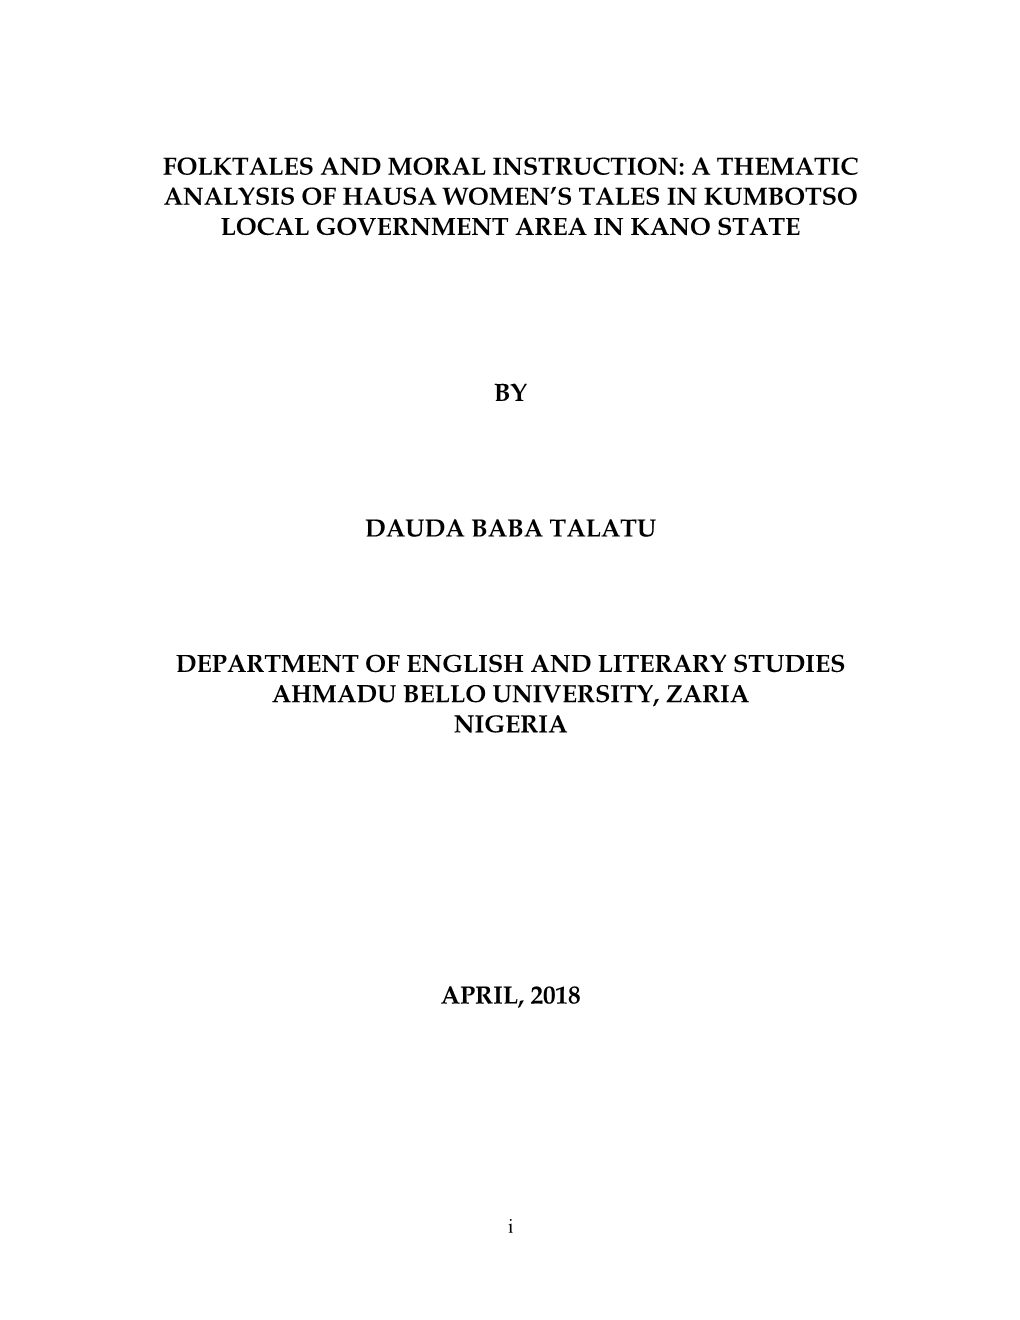 Folktales and Moral Instruction: a Thematic Analysis of Hausa Women’S Tales in Kumbotso Local Government Area in Kano State